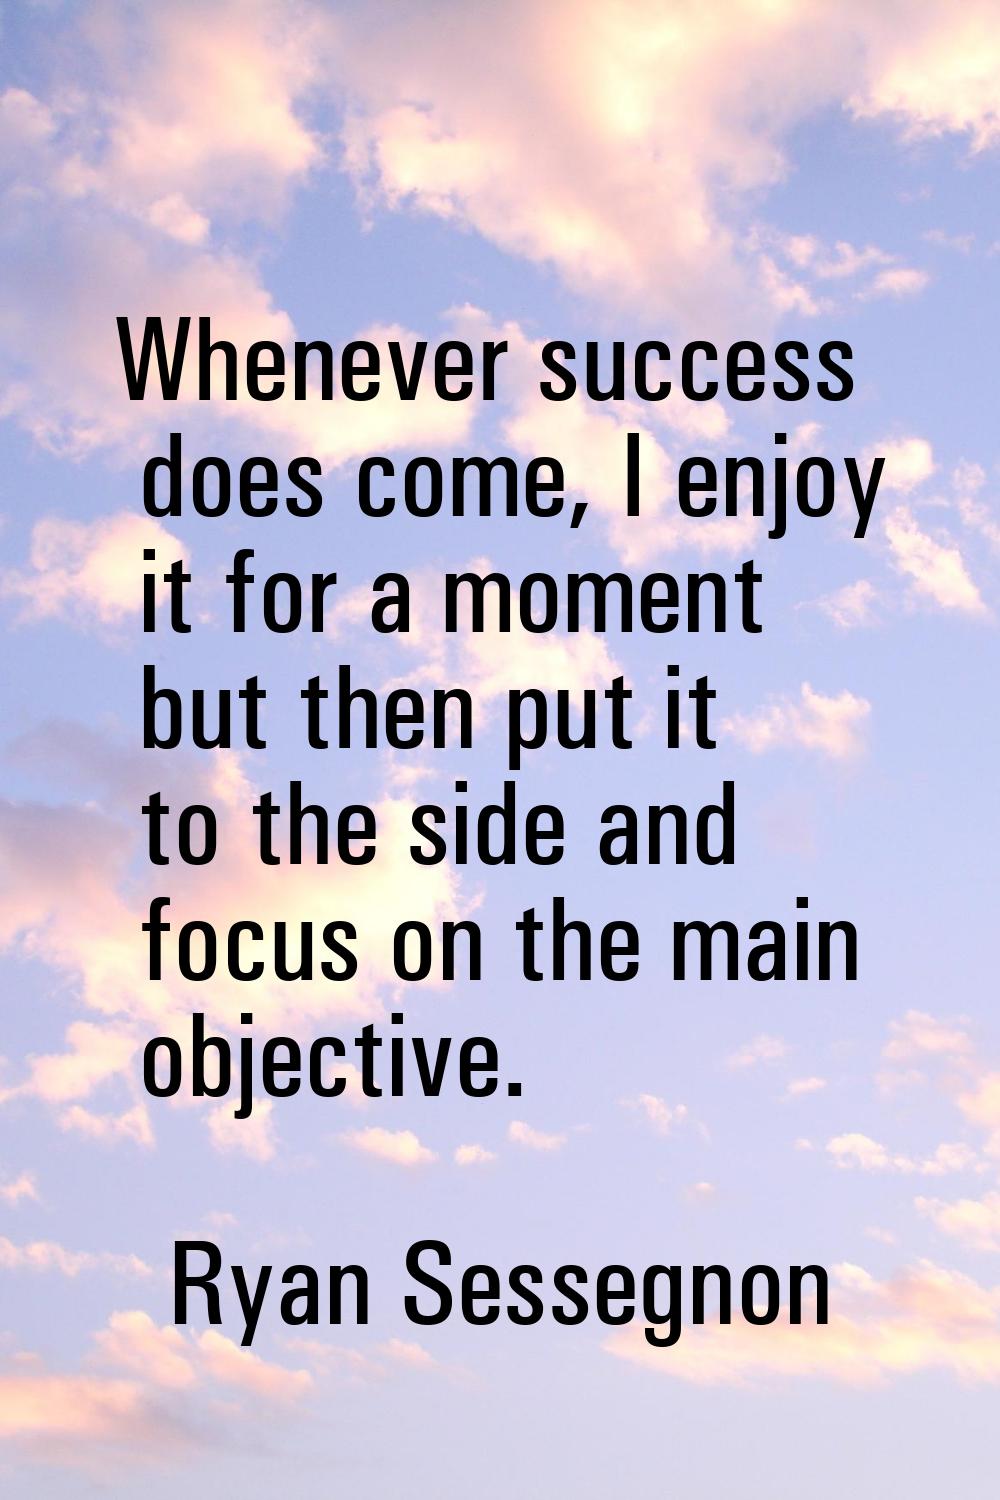 Whenever success does come, I enjoy it for a moment but then put it to the side and focus on the ma